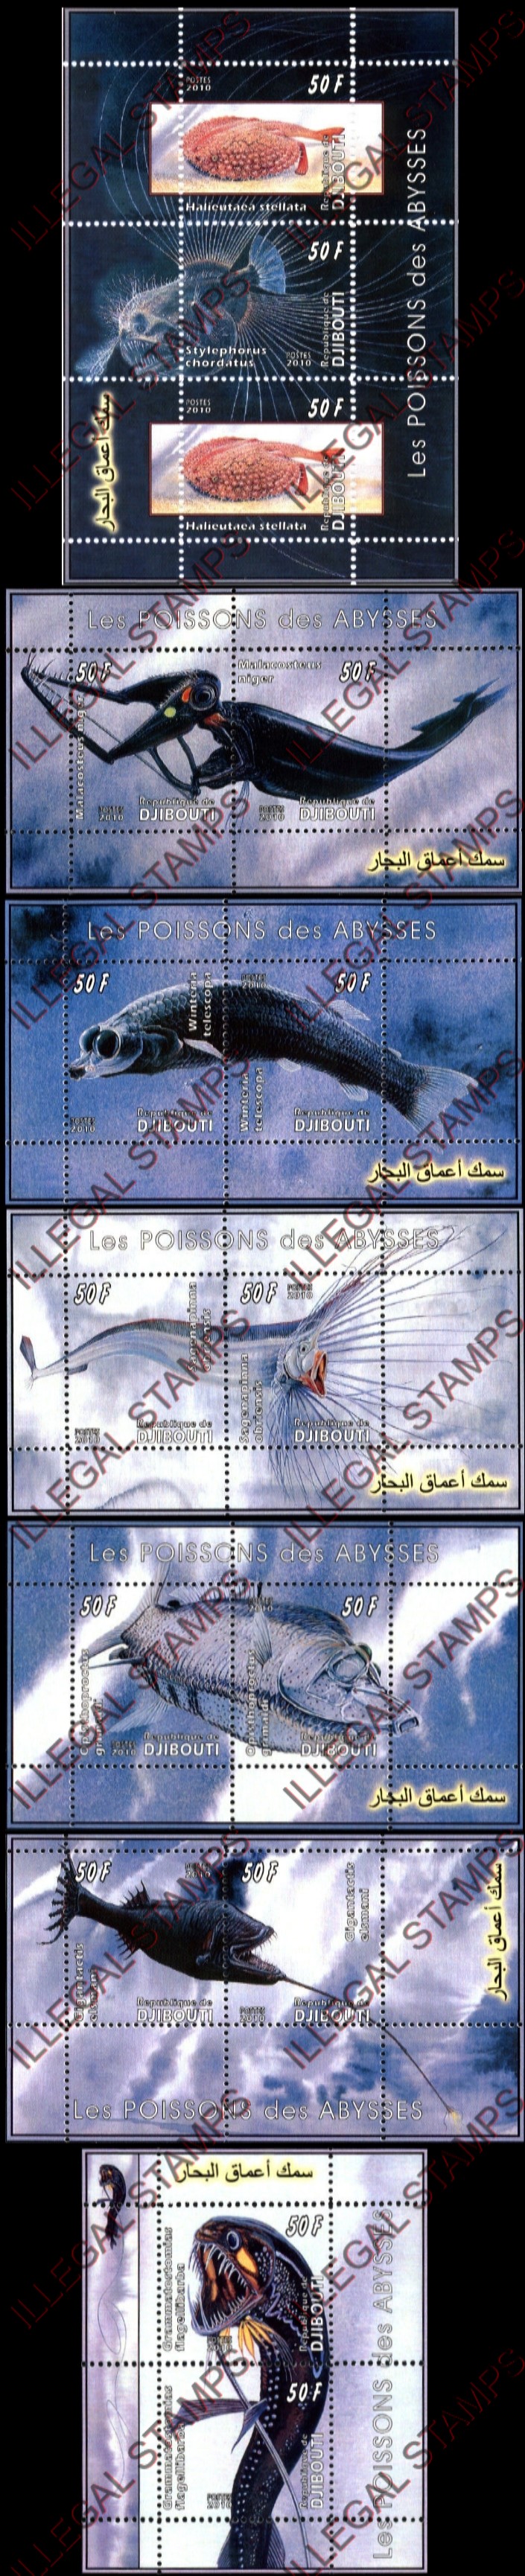 Djibouti 2011 Fish of the Abyss Illegal Stamp Souvenir Sheets of 2